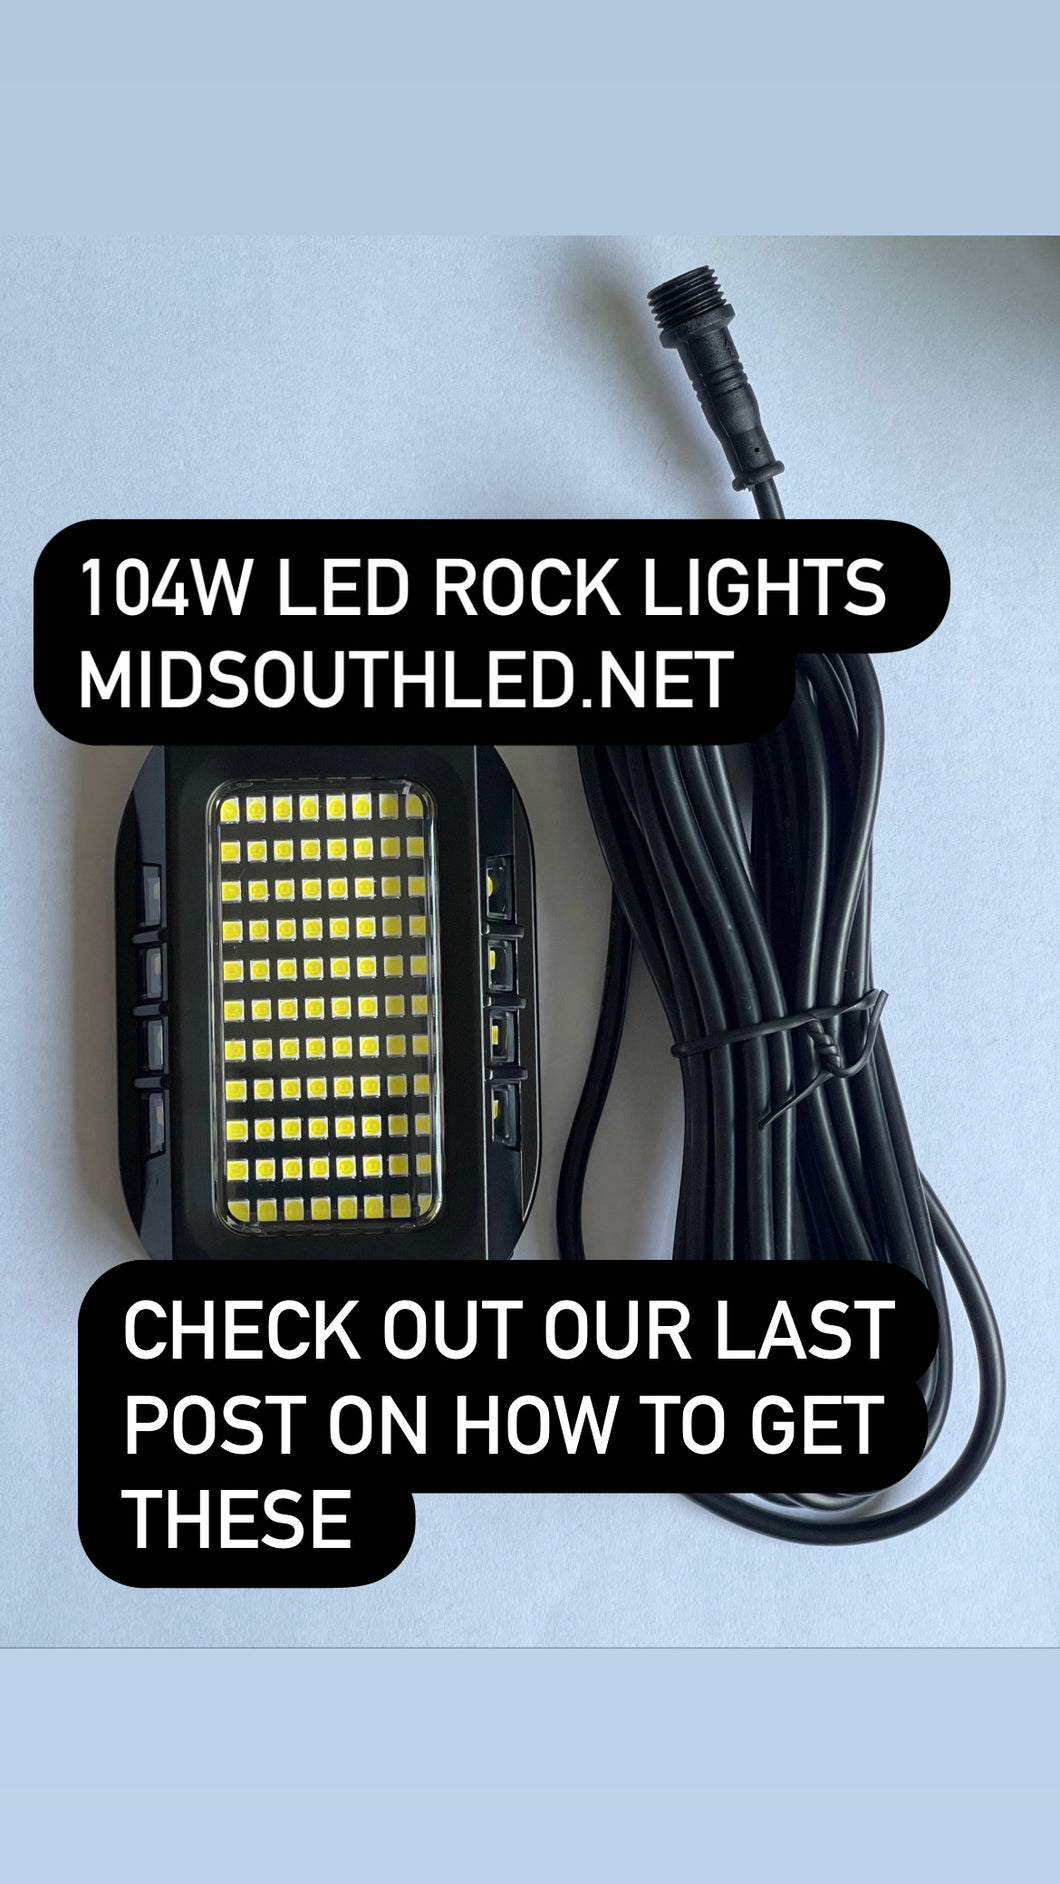 104 Led Pure White Rock Lights (The brightest on the market